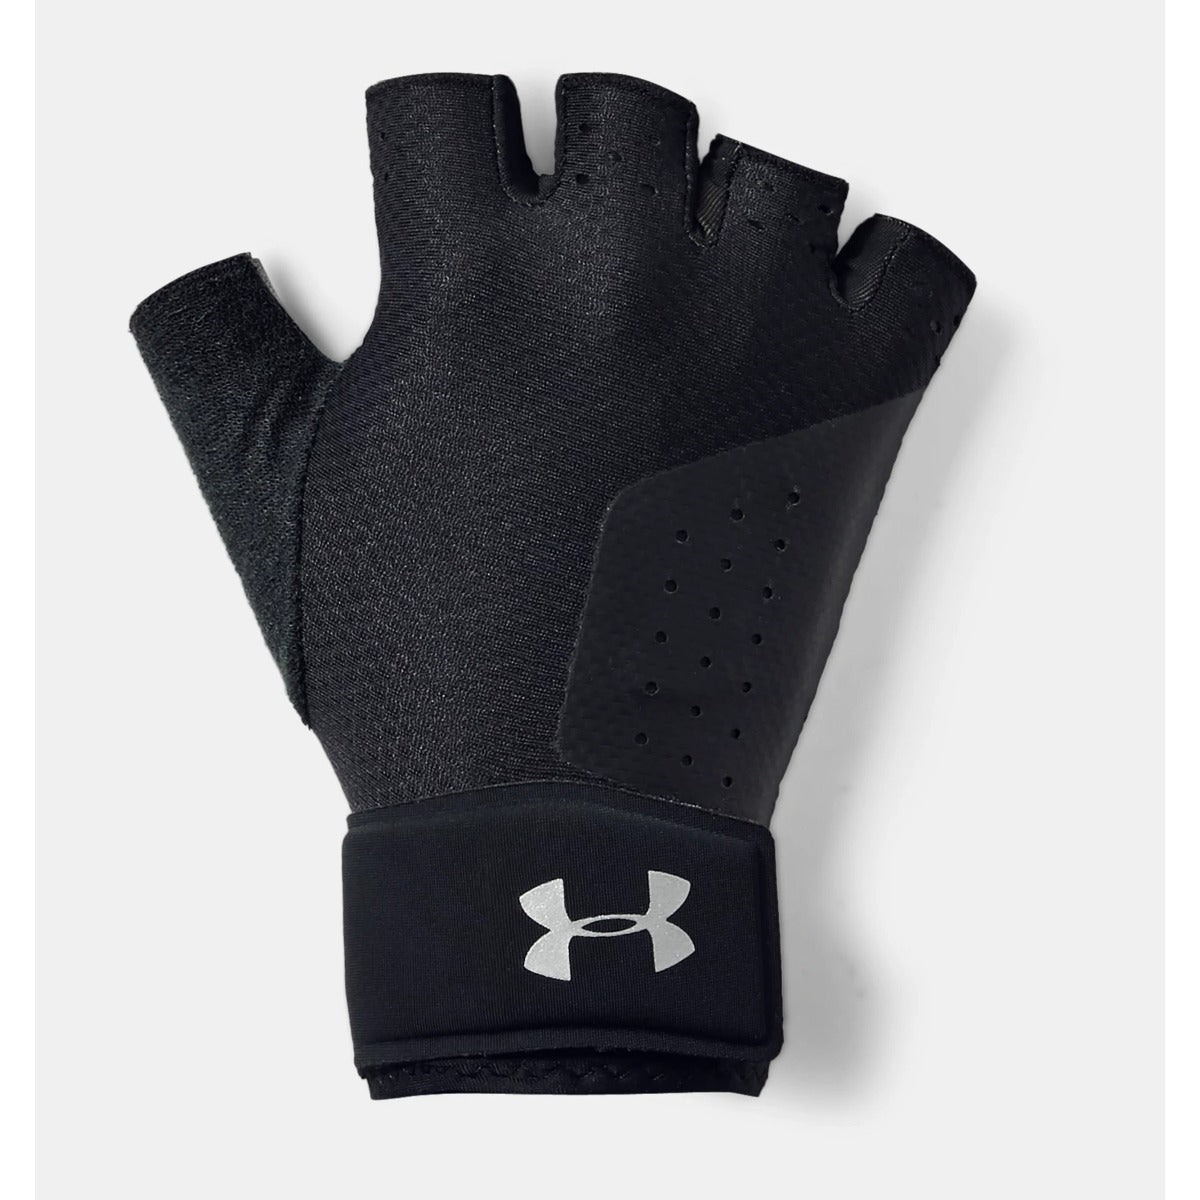 Under Armour Women's Weight Lifting Gloves (Black 001)